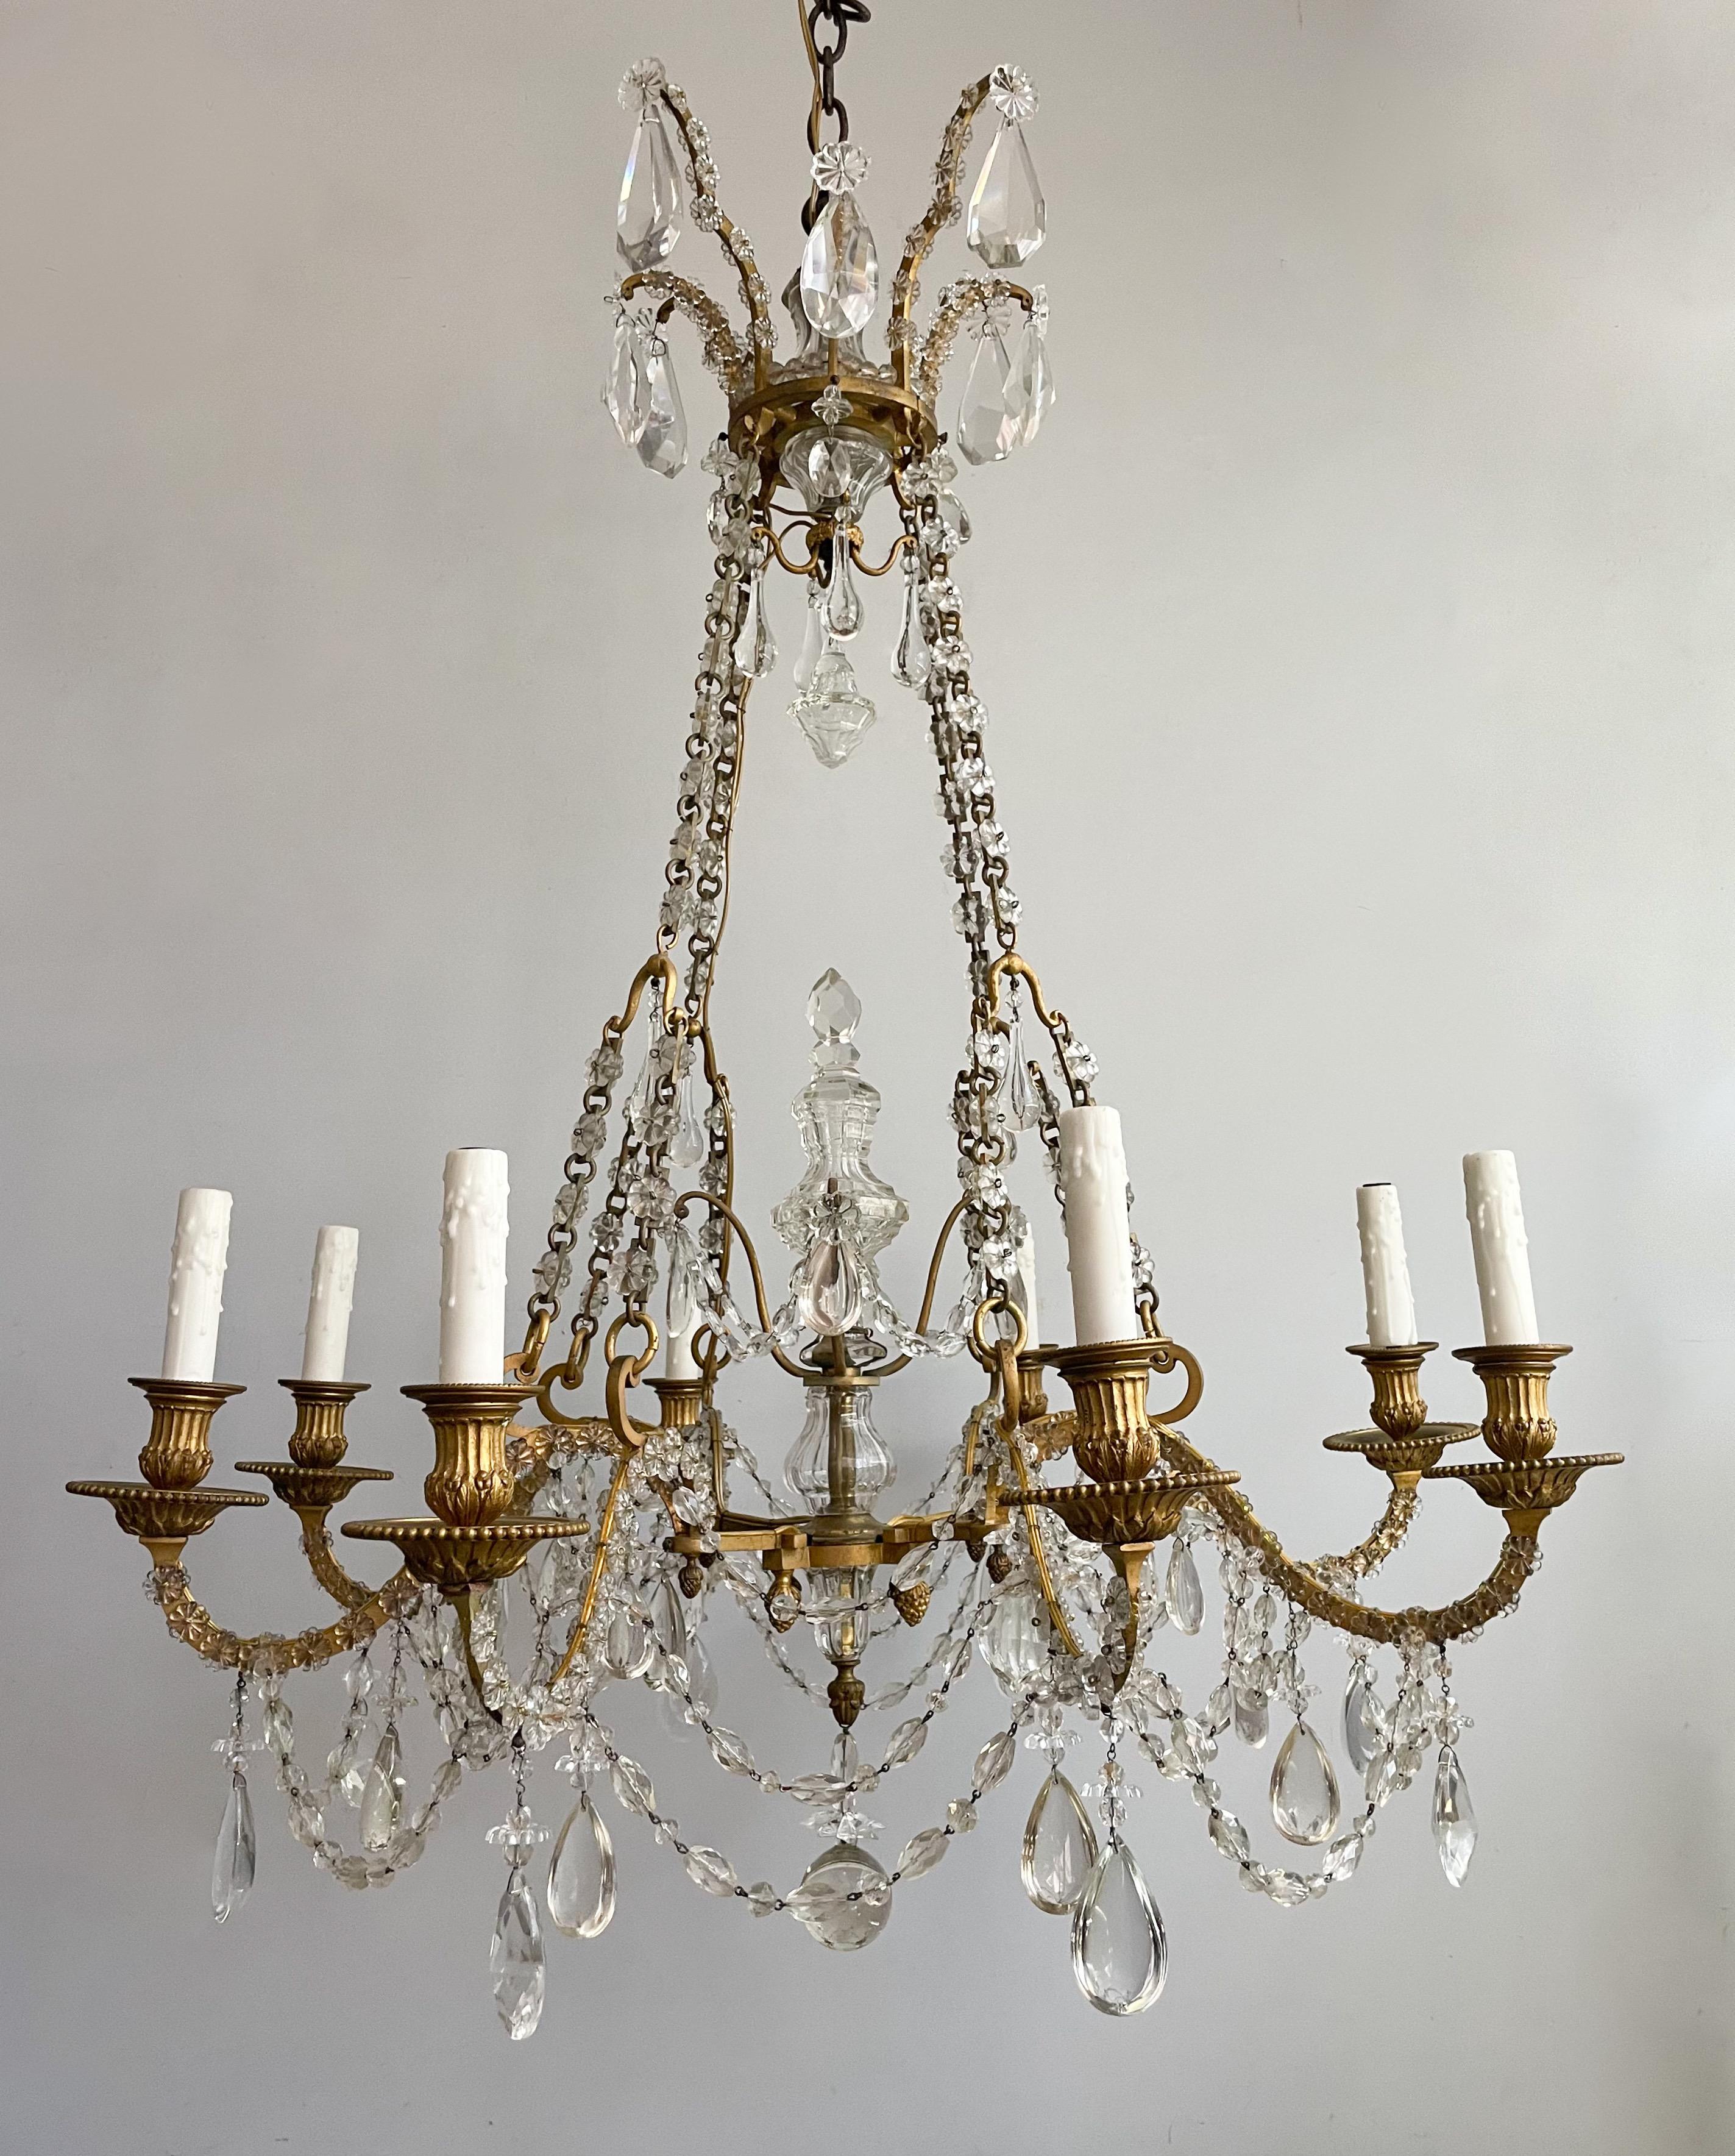 Exquisite, antique French bronze-doré and crystal chandelier in the Empire style. 

The chandelier features a gilt-bronze base suspended by chains that taper up to a delicate crown-shaped top. The entire chandelier is embellished with crystal